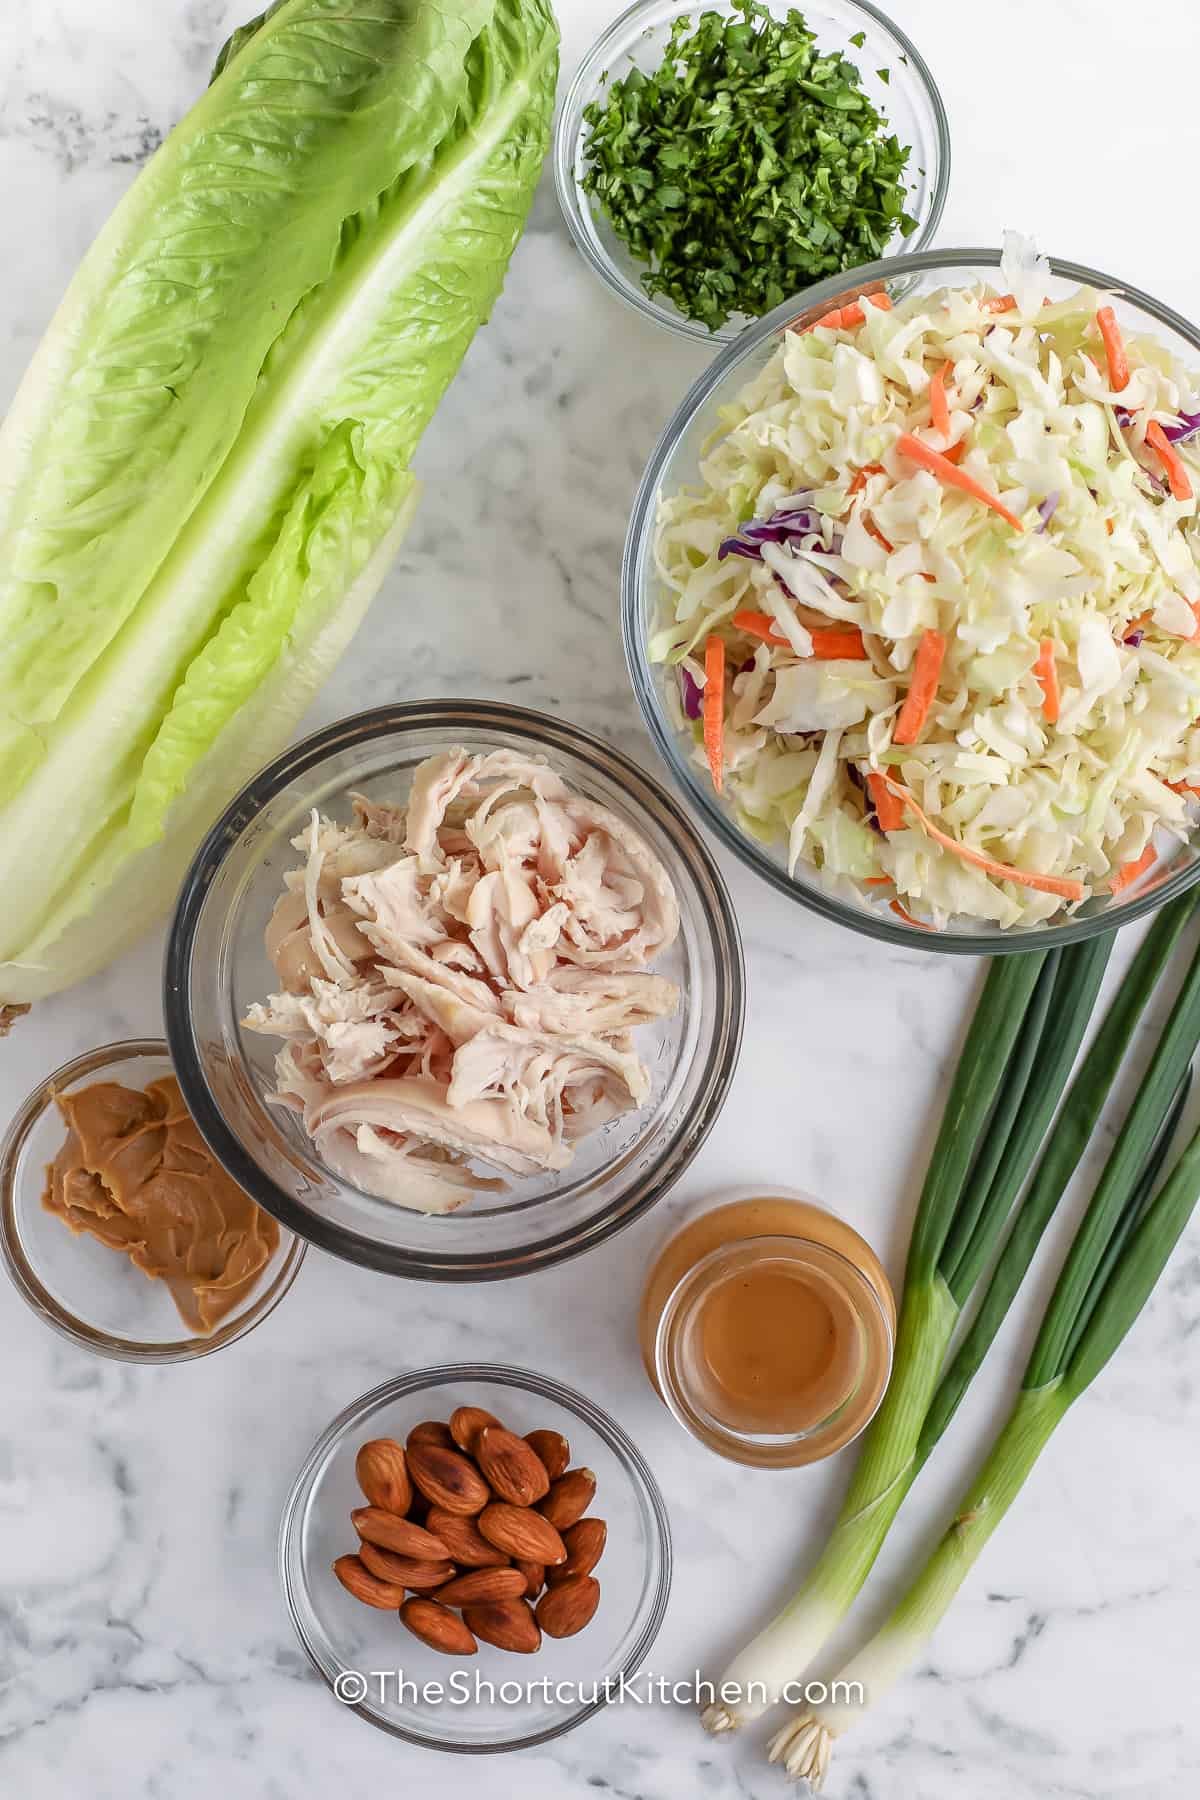 ingredients assembled to make this asian chicken salad recipe